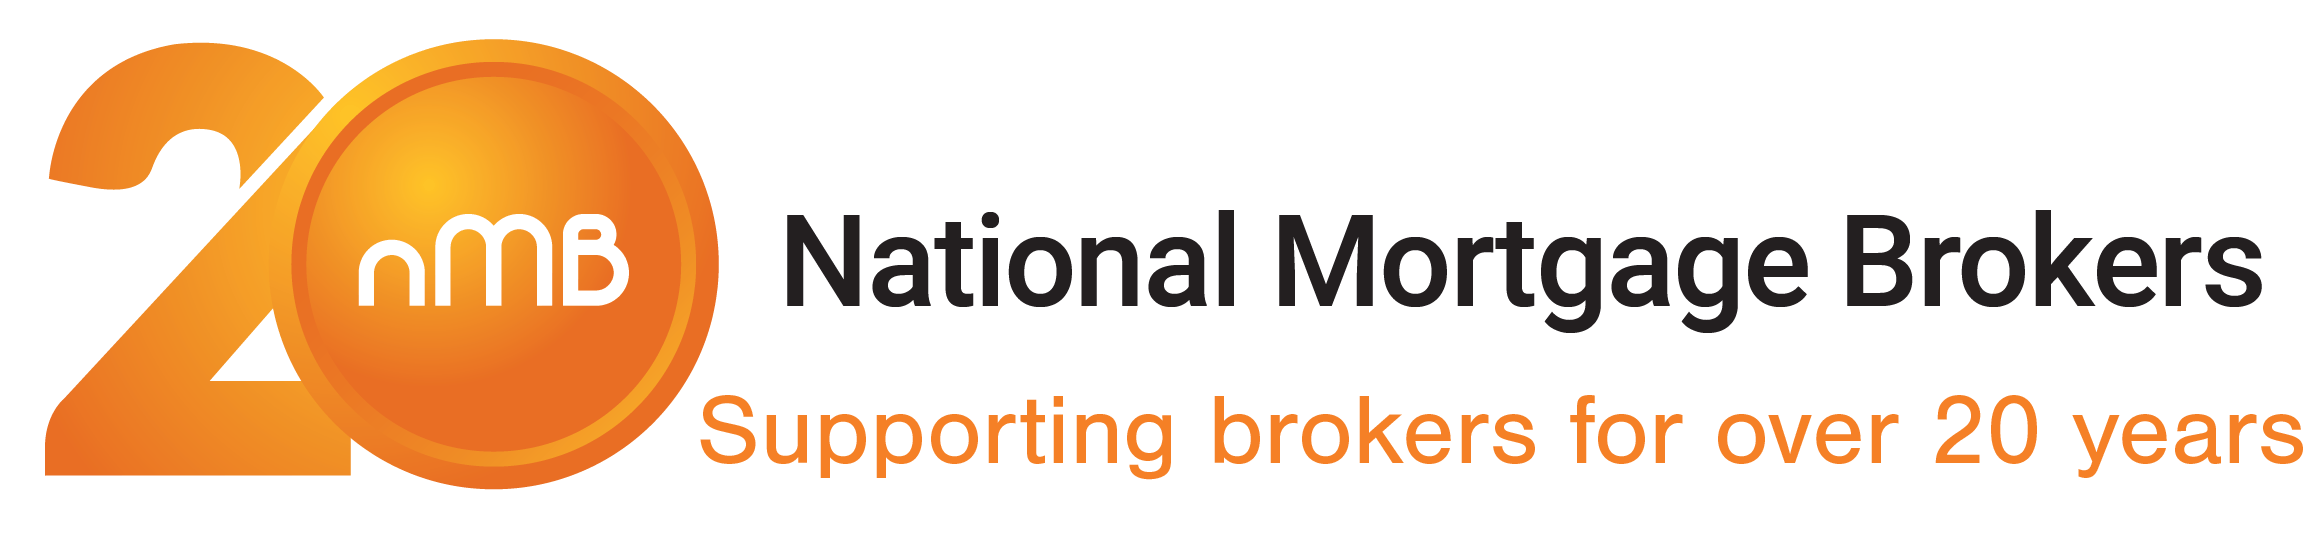 National Mortgage Brokers